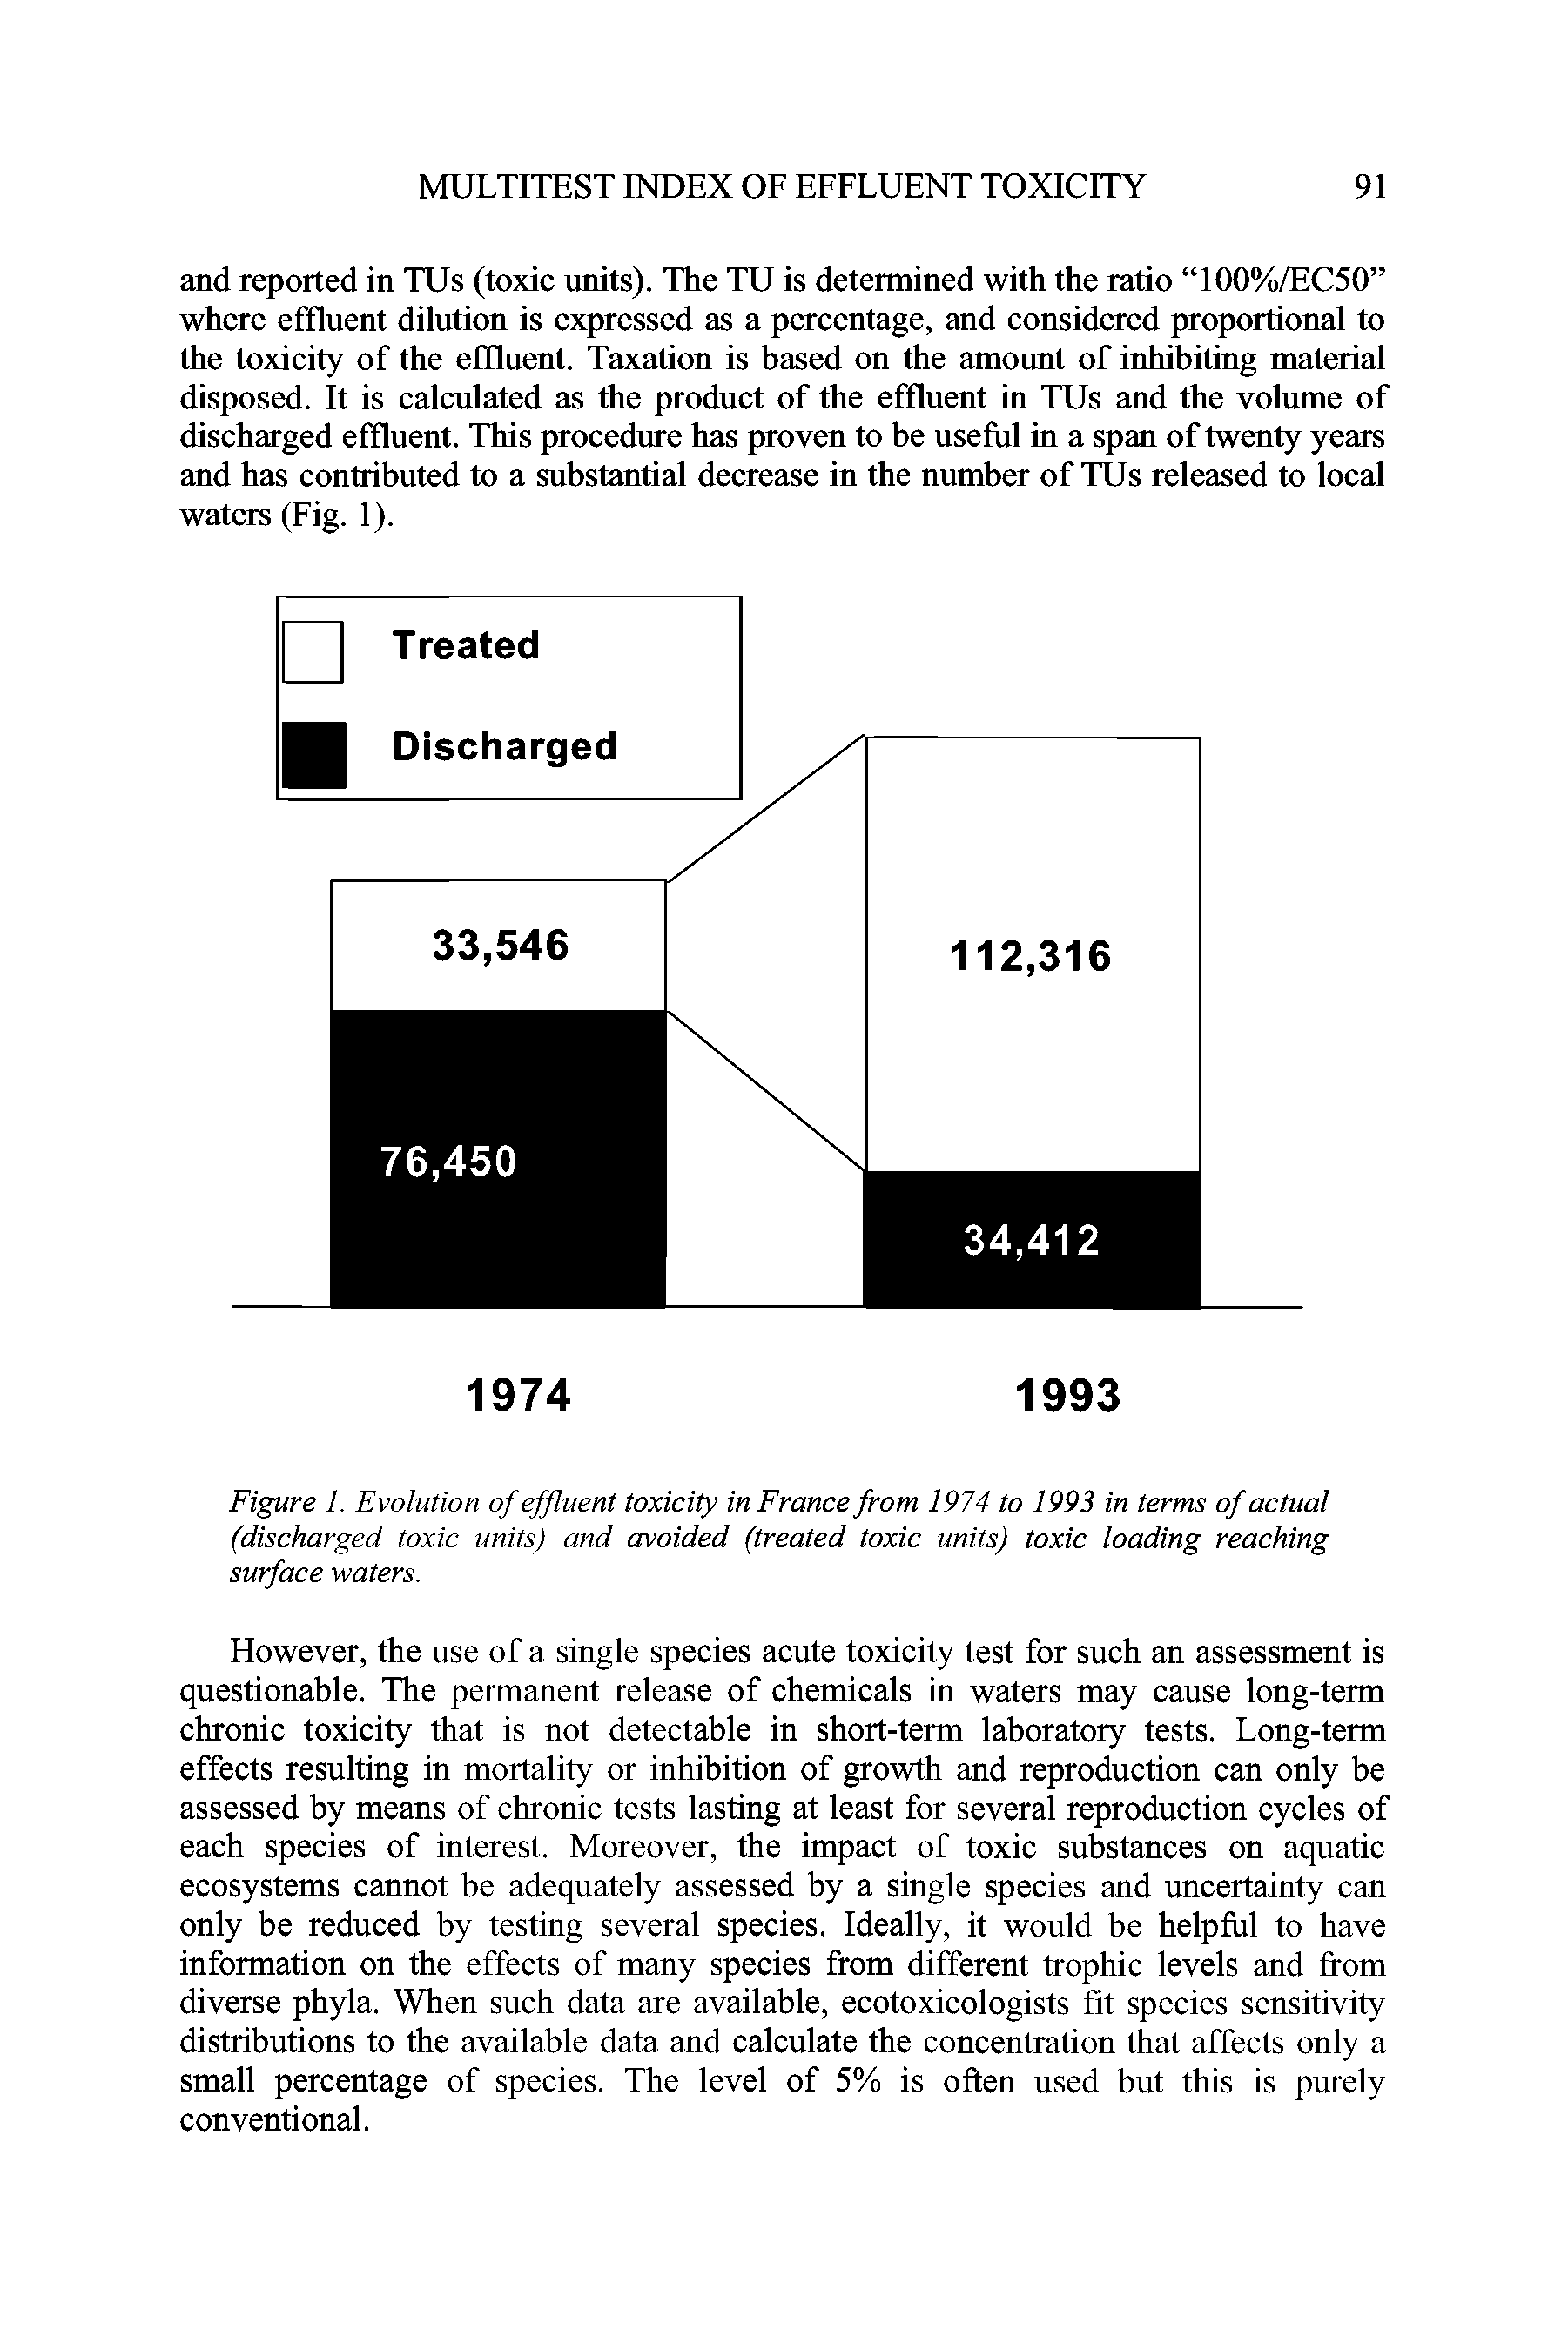 Figure 1. Evolution of effluent toxicity in France from 1974 to 1993 in terms of actual (discharged toxic units) and avoided (treated toxic units) toxic loading reaching surface waters.